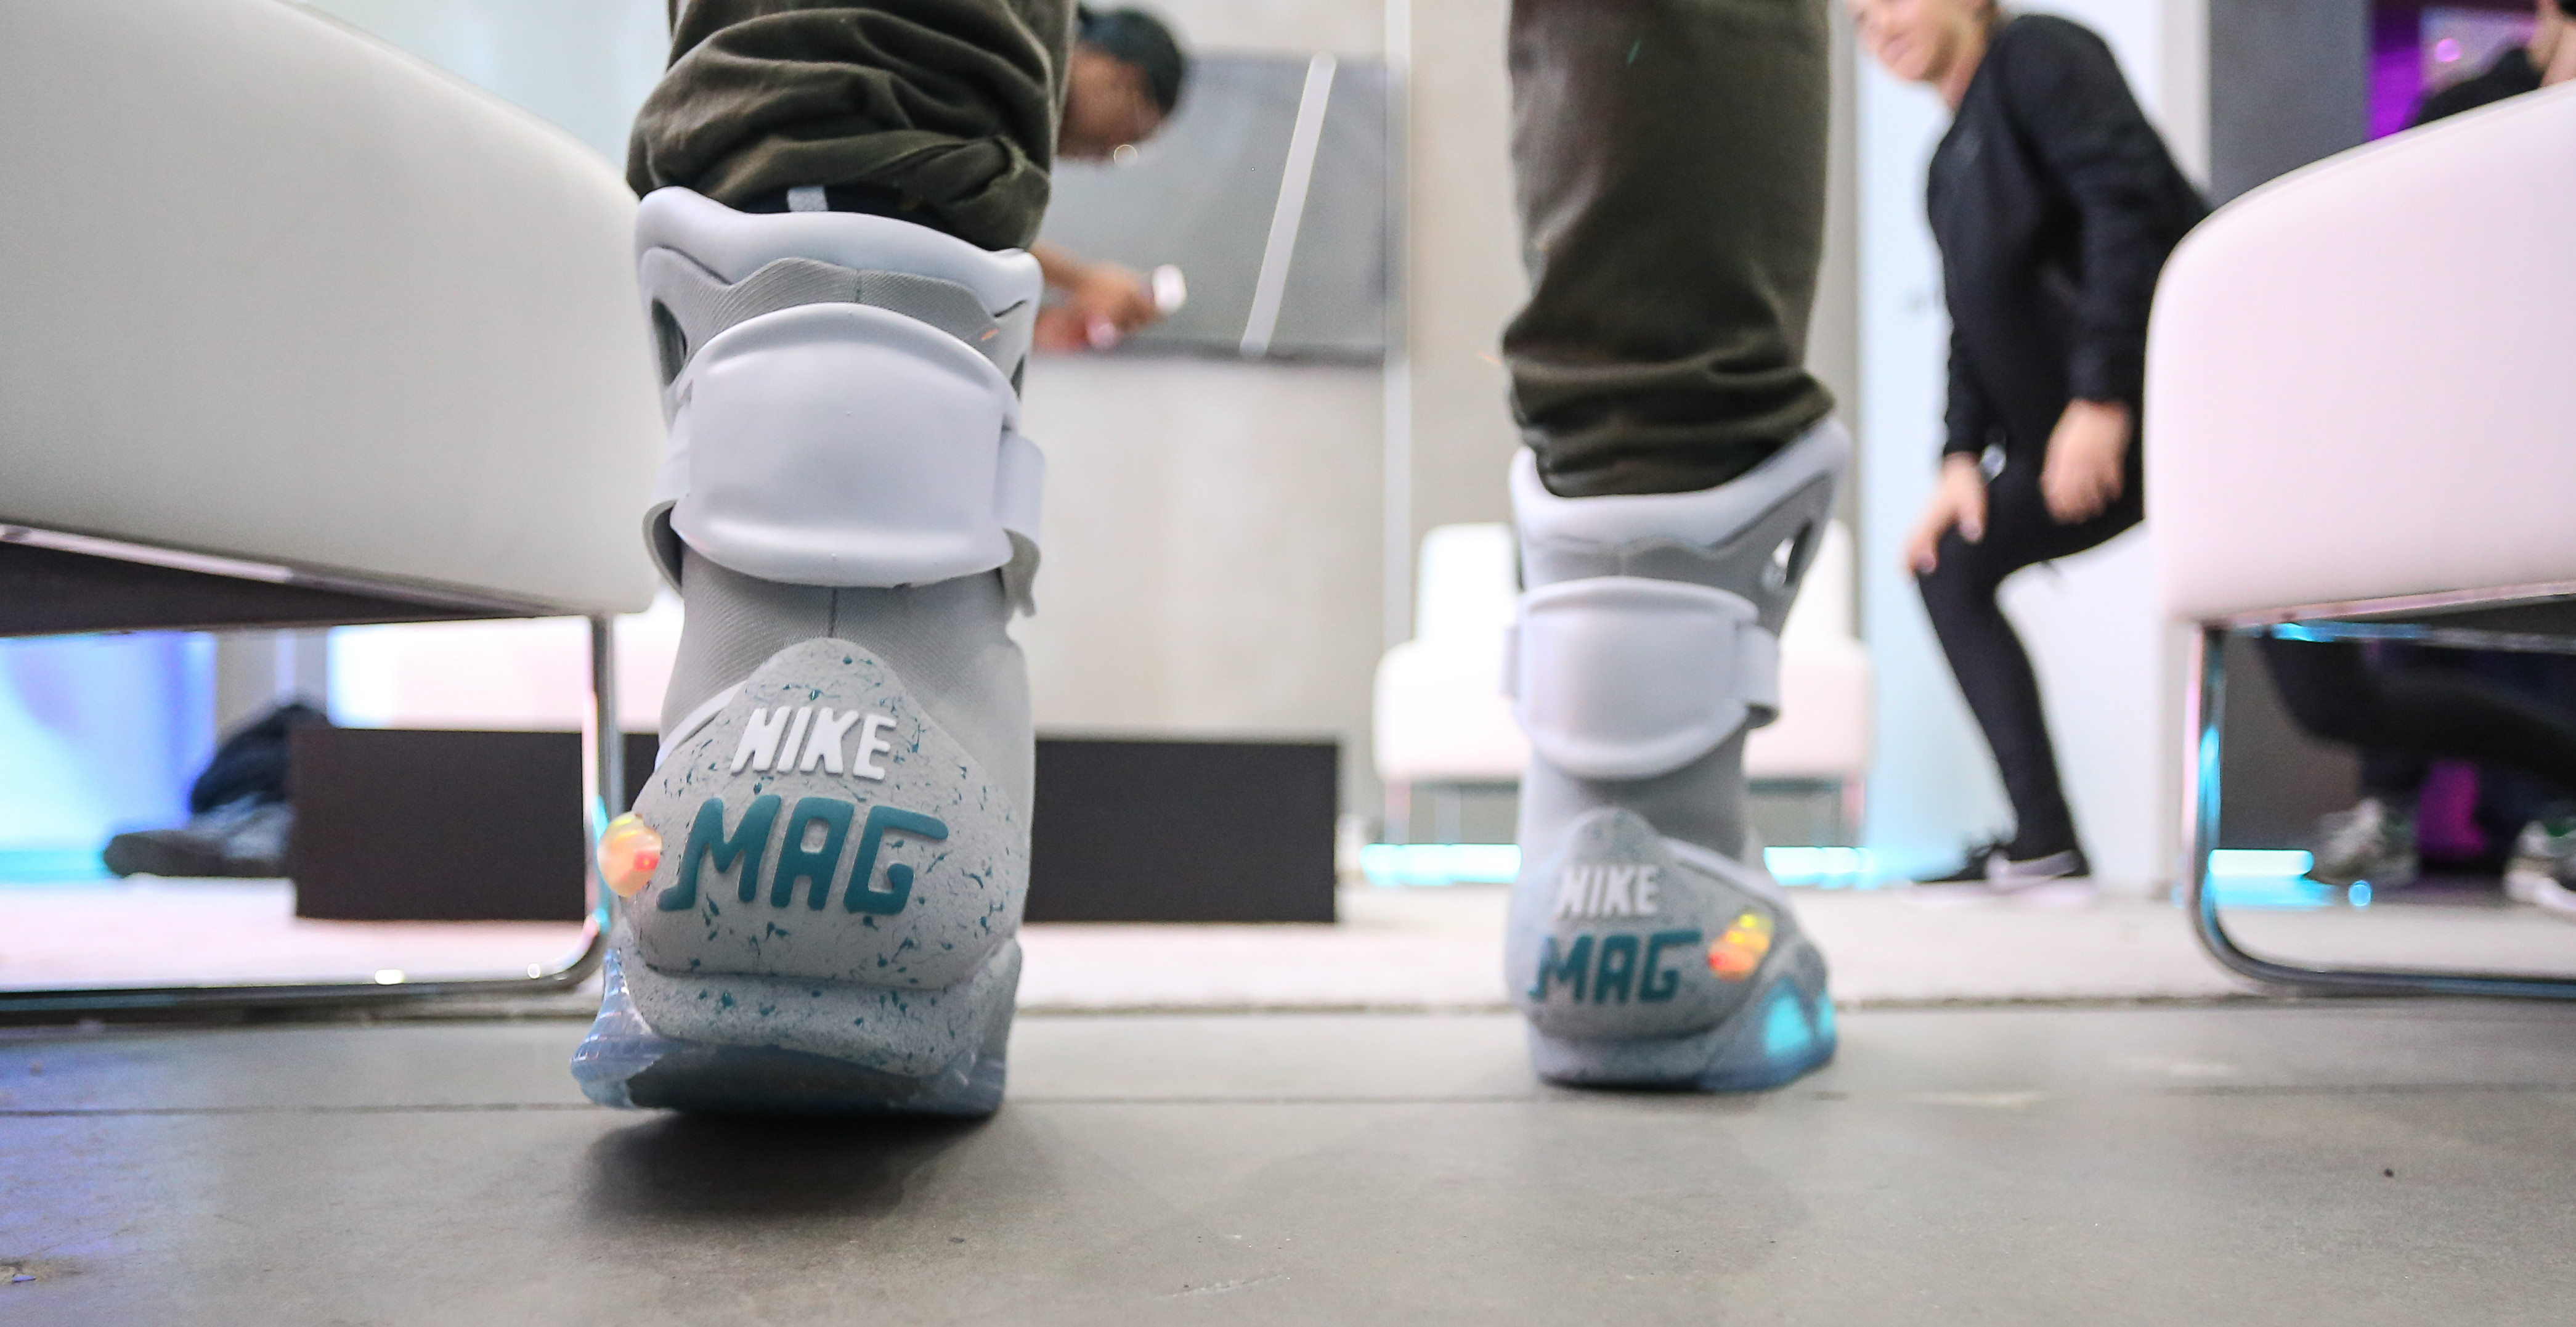 wearing air mags